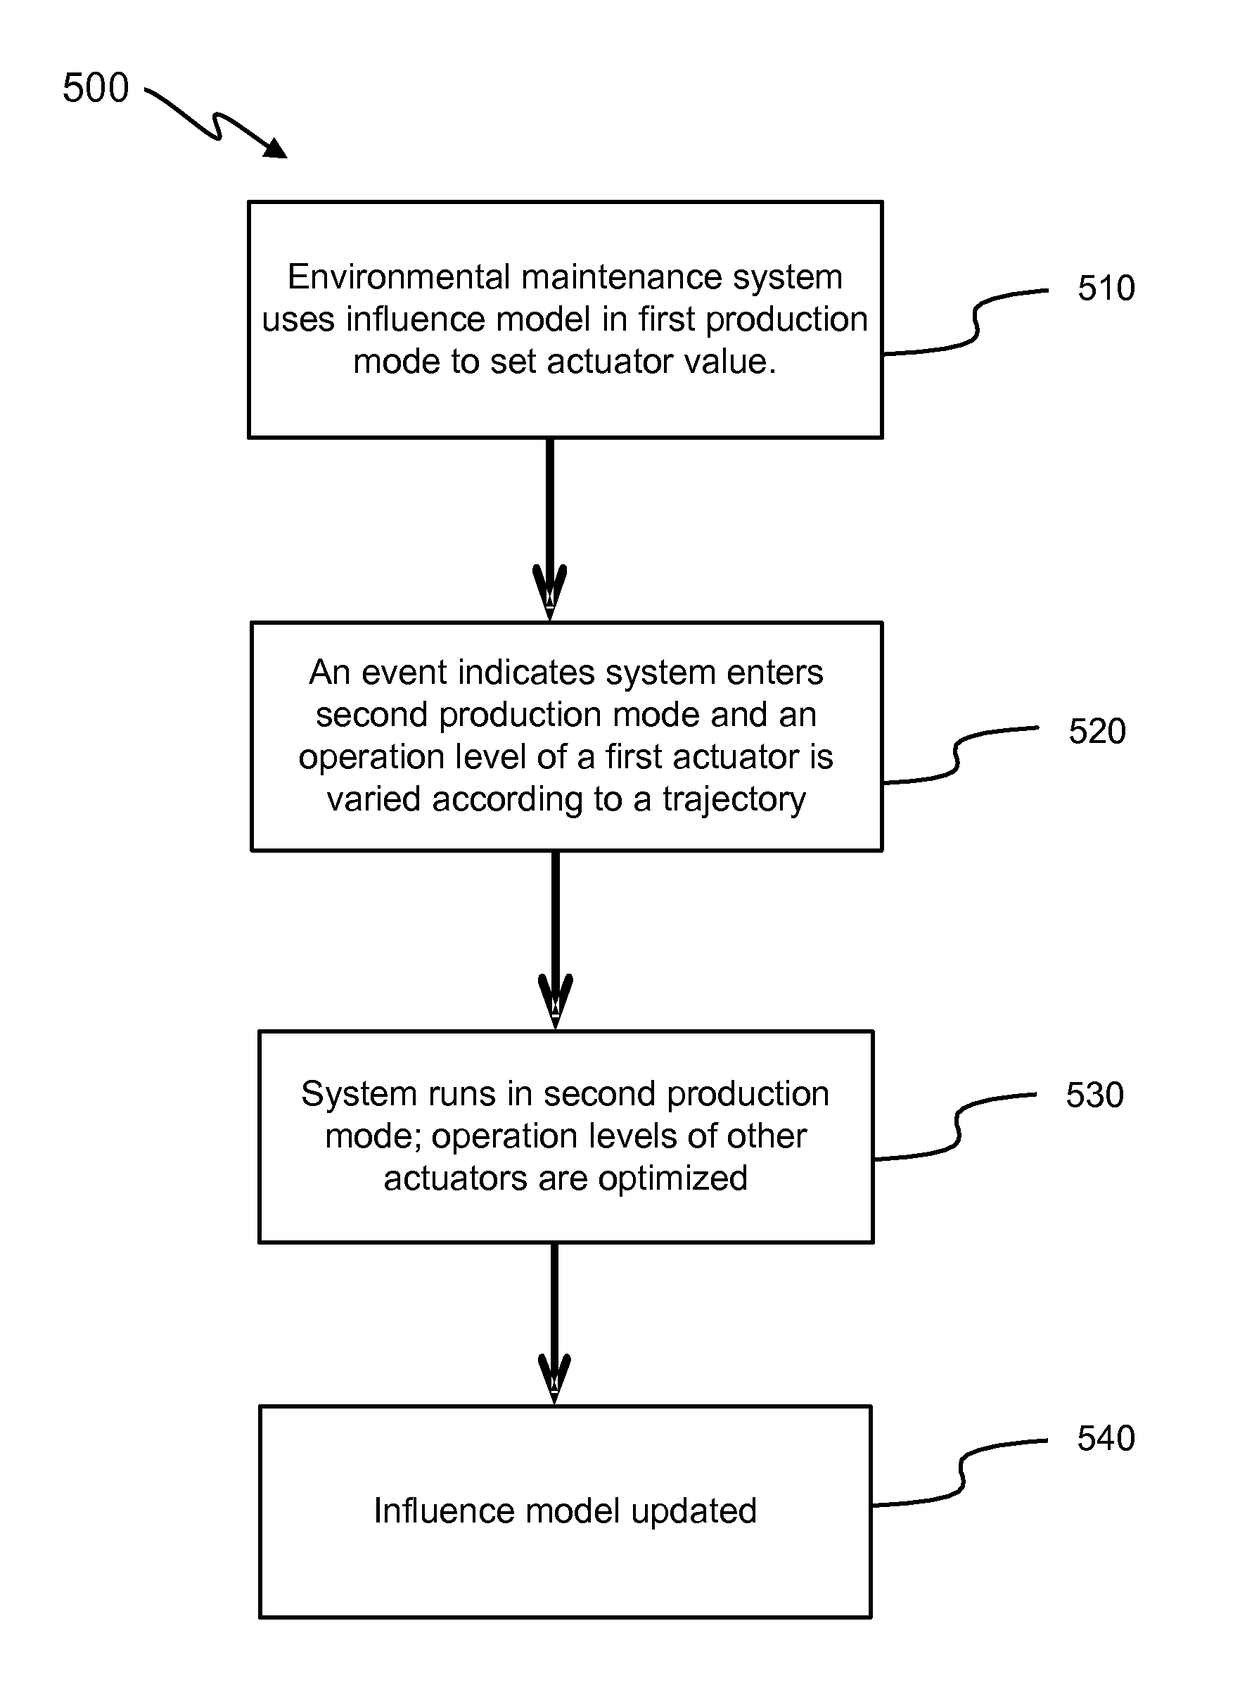 Influence learning for managing physical conditions of an environmentally controlled space by utilizing a calibration override which constrains an actuator to a trajectory